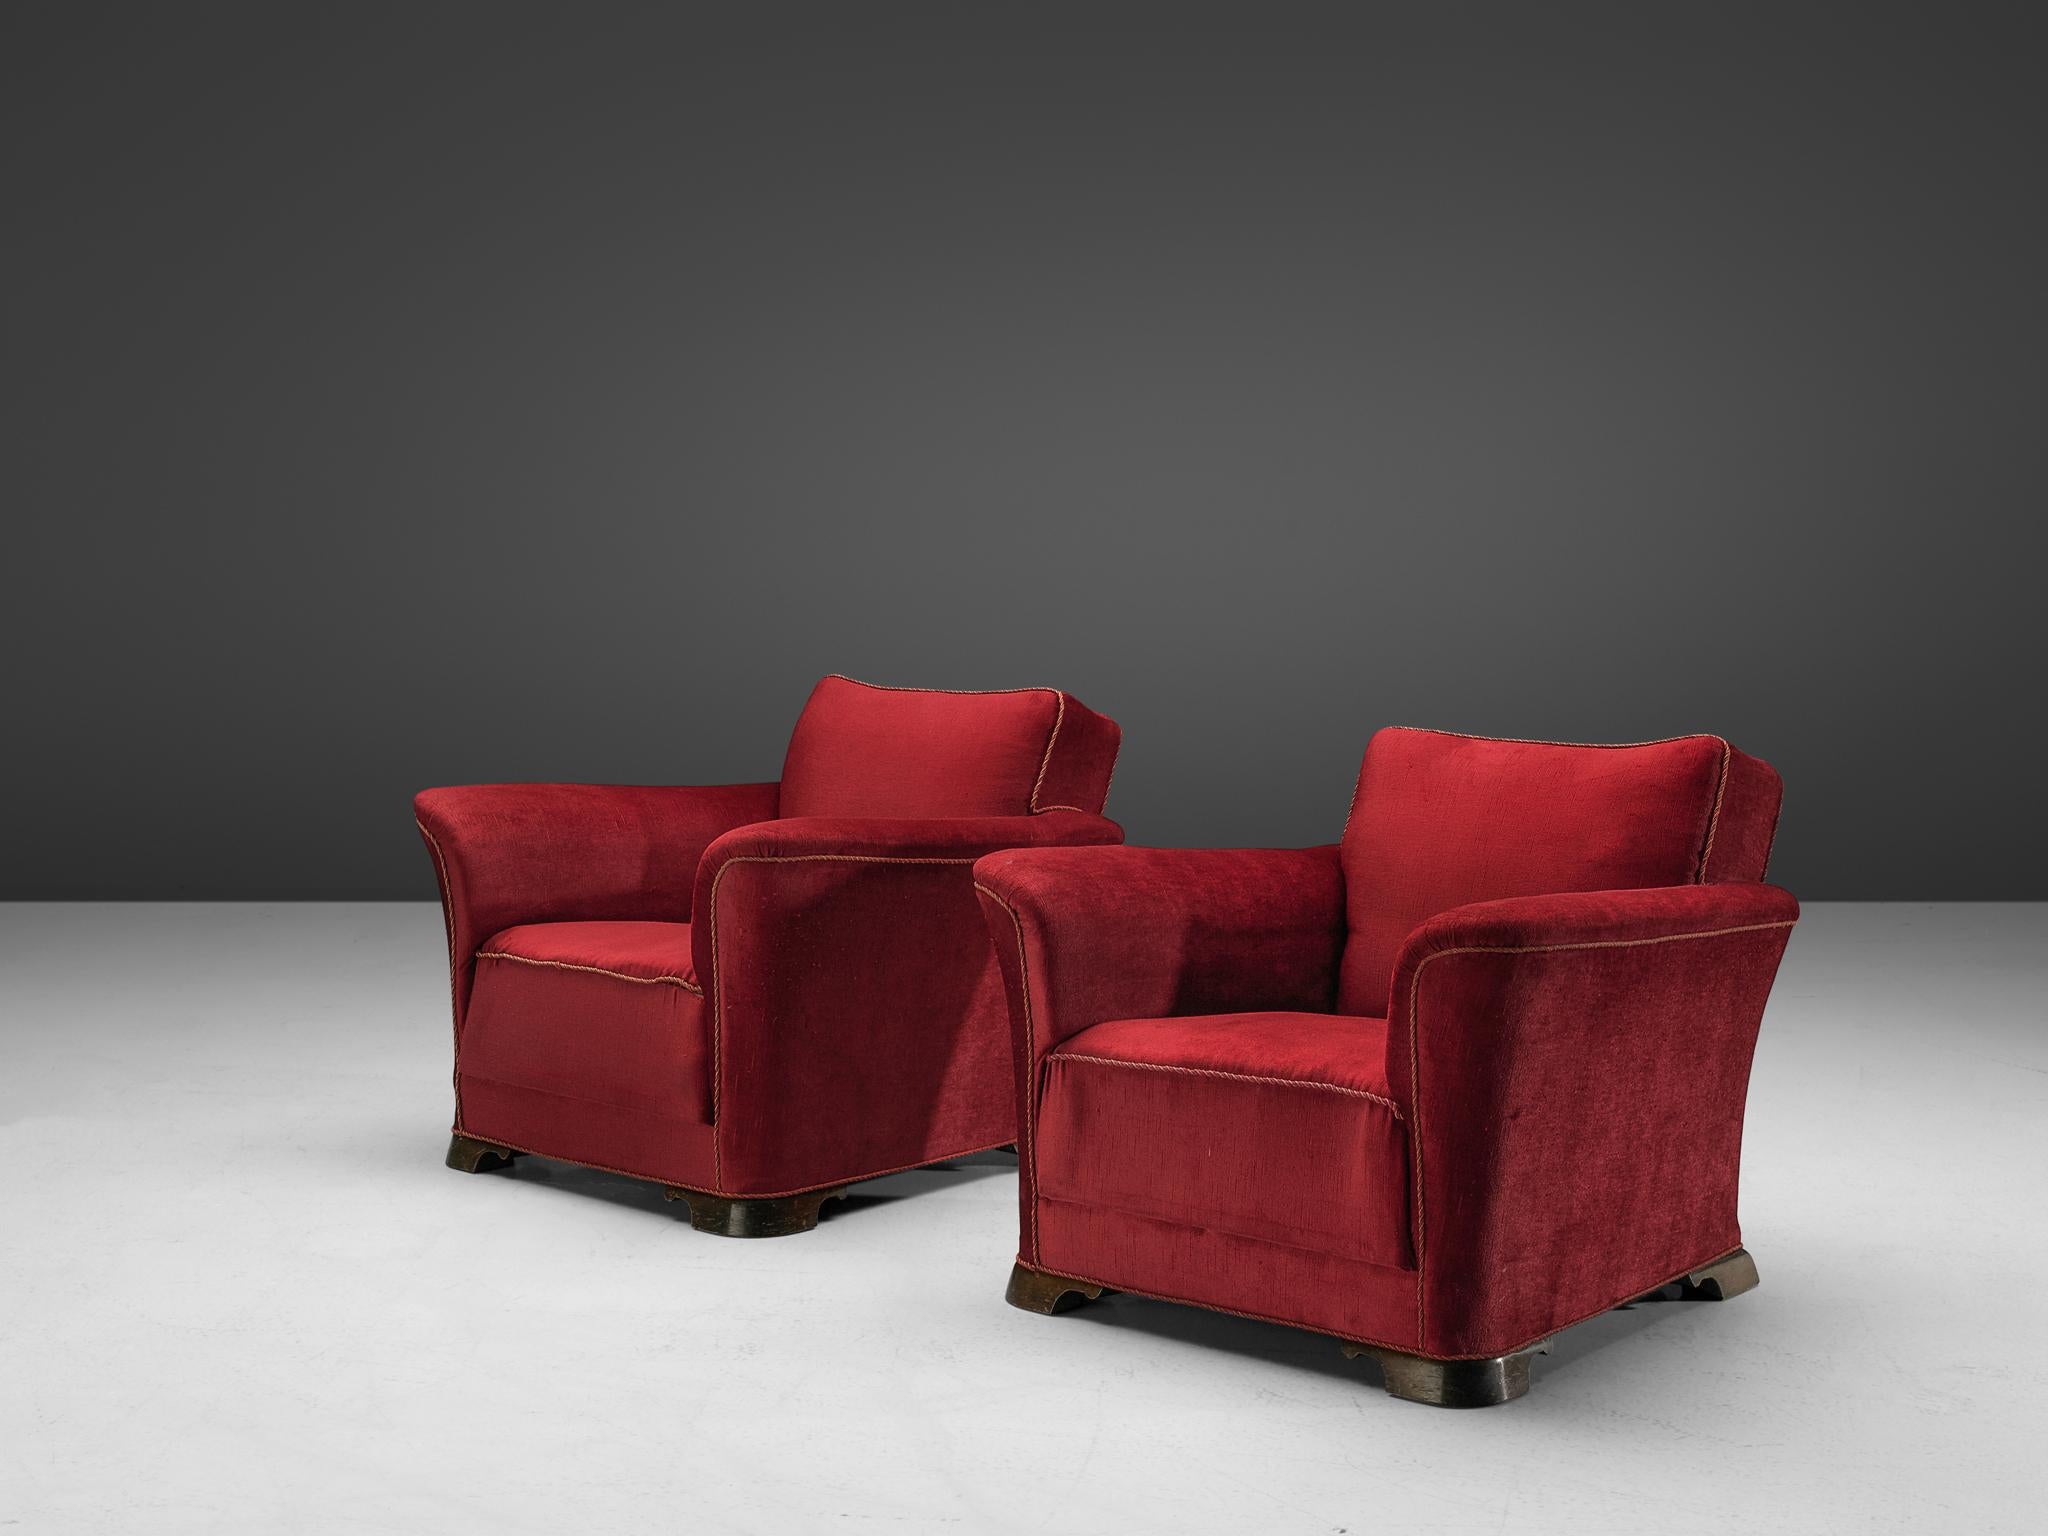 Pair of lounge chairs, velours and mahogany, Denmark, 1940s

A set of two grand and comfortable armchairs in red velours upholstery. The lounge chair features a thick seat, which is characteristic for the Art Deco movement. Large upsweeping armrests